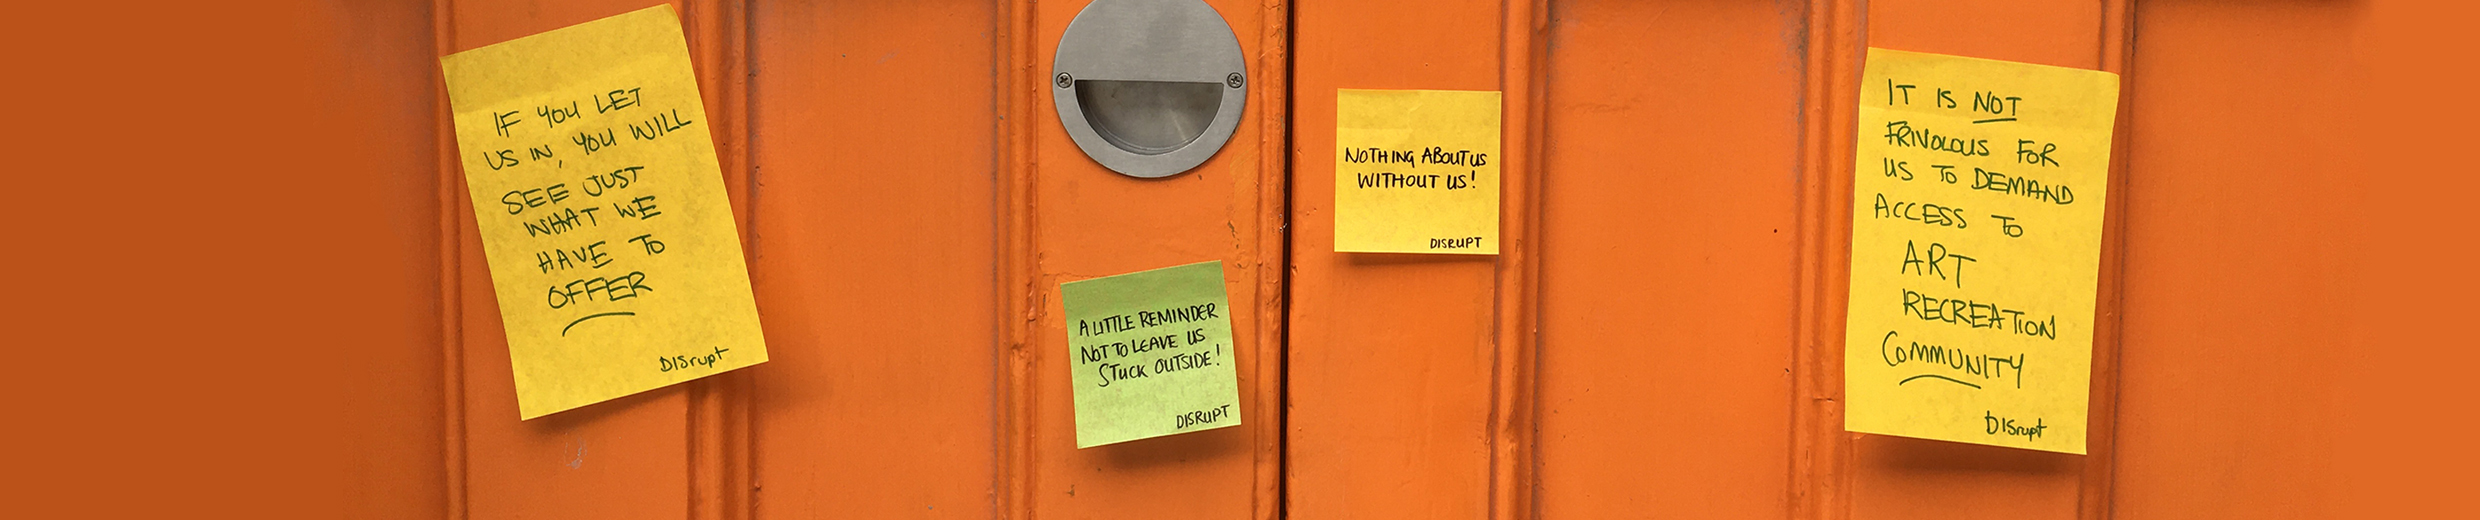 A photo of four post it notes stuck on an orange wooden door. From left to right the post it notes read ‘If you let us in you will see just what we have to offer’, ‘A little reminder not to leave us stuck outside!’, ‘Nothing about us without us!’ And ‘It is not frivolous for us to demand access to art, recreation, community’. They are all signed of ‘DISrupt’